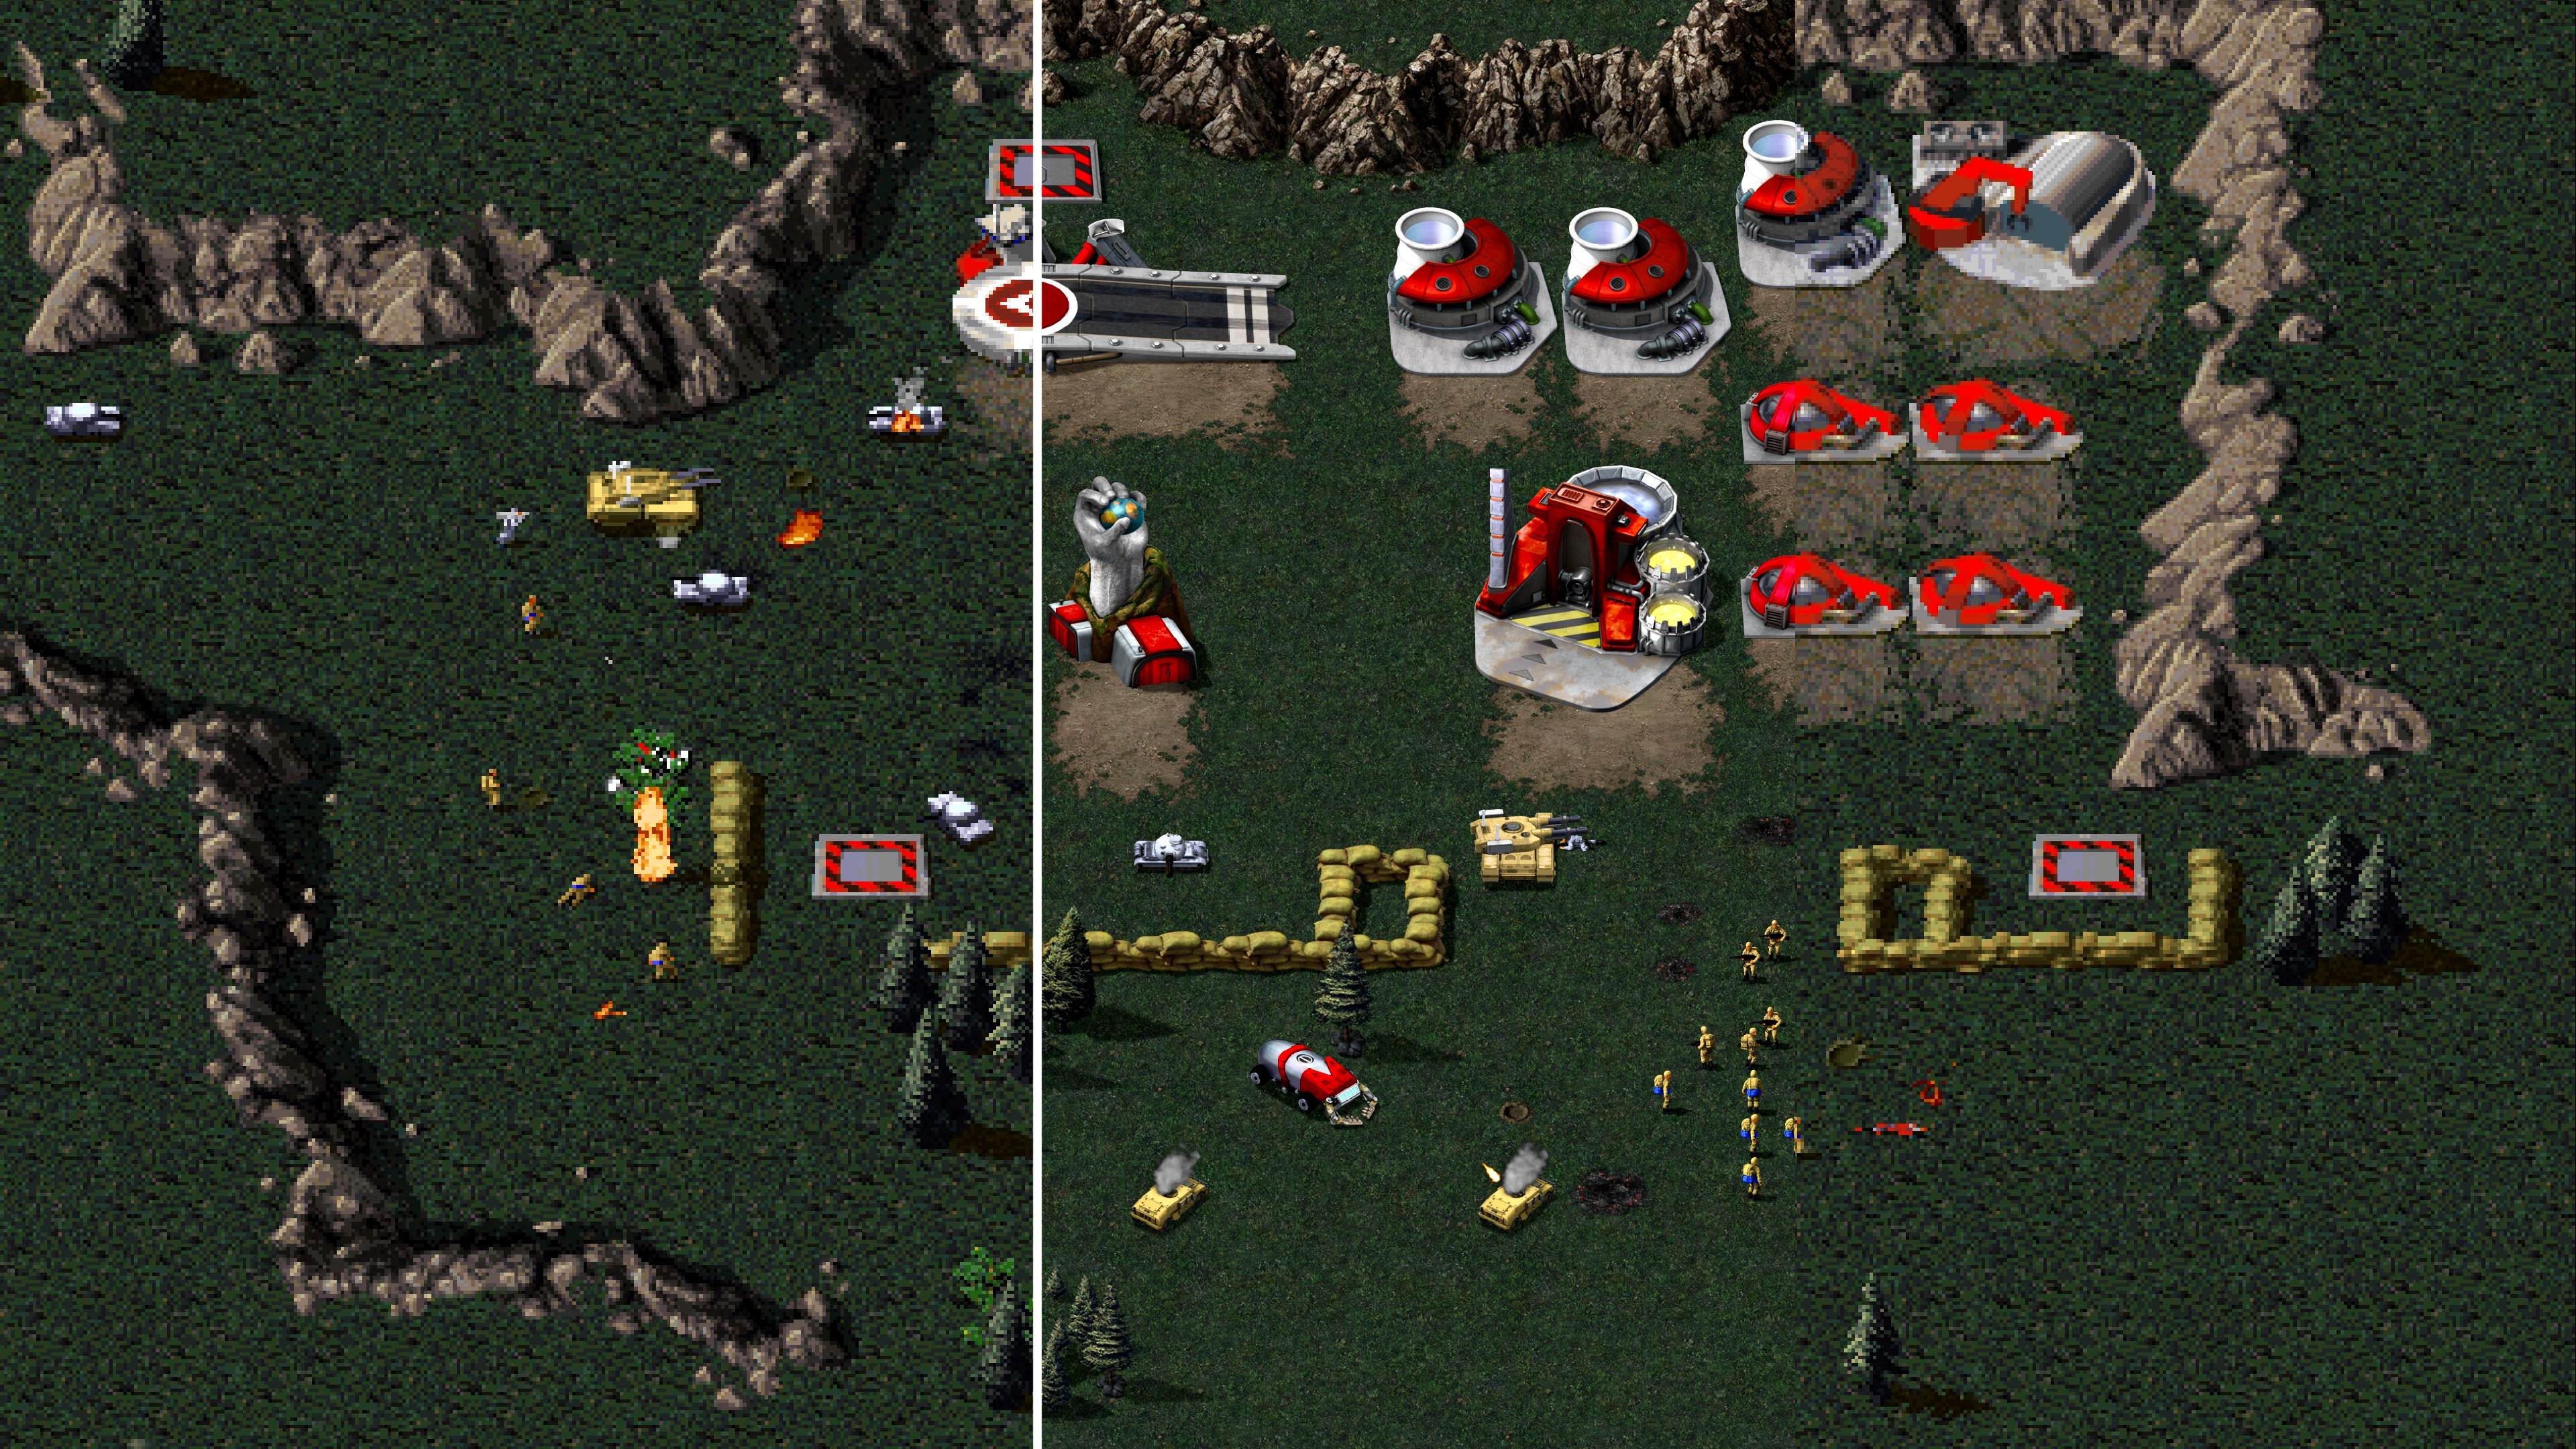 Command Conquer Remastered collection 2020. Command and Conquer 1995 Remaster. Command Conquer Tiberian Dawn Remastered. CNC Remastered collection. Detail command